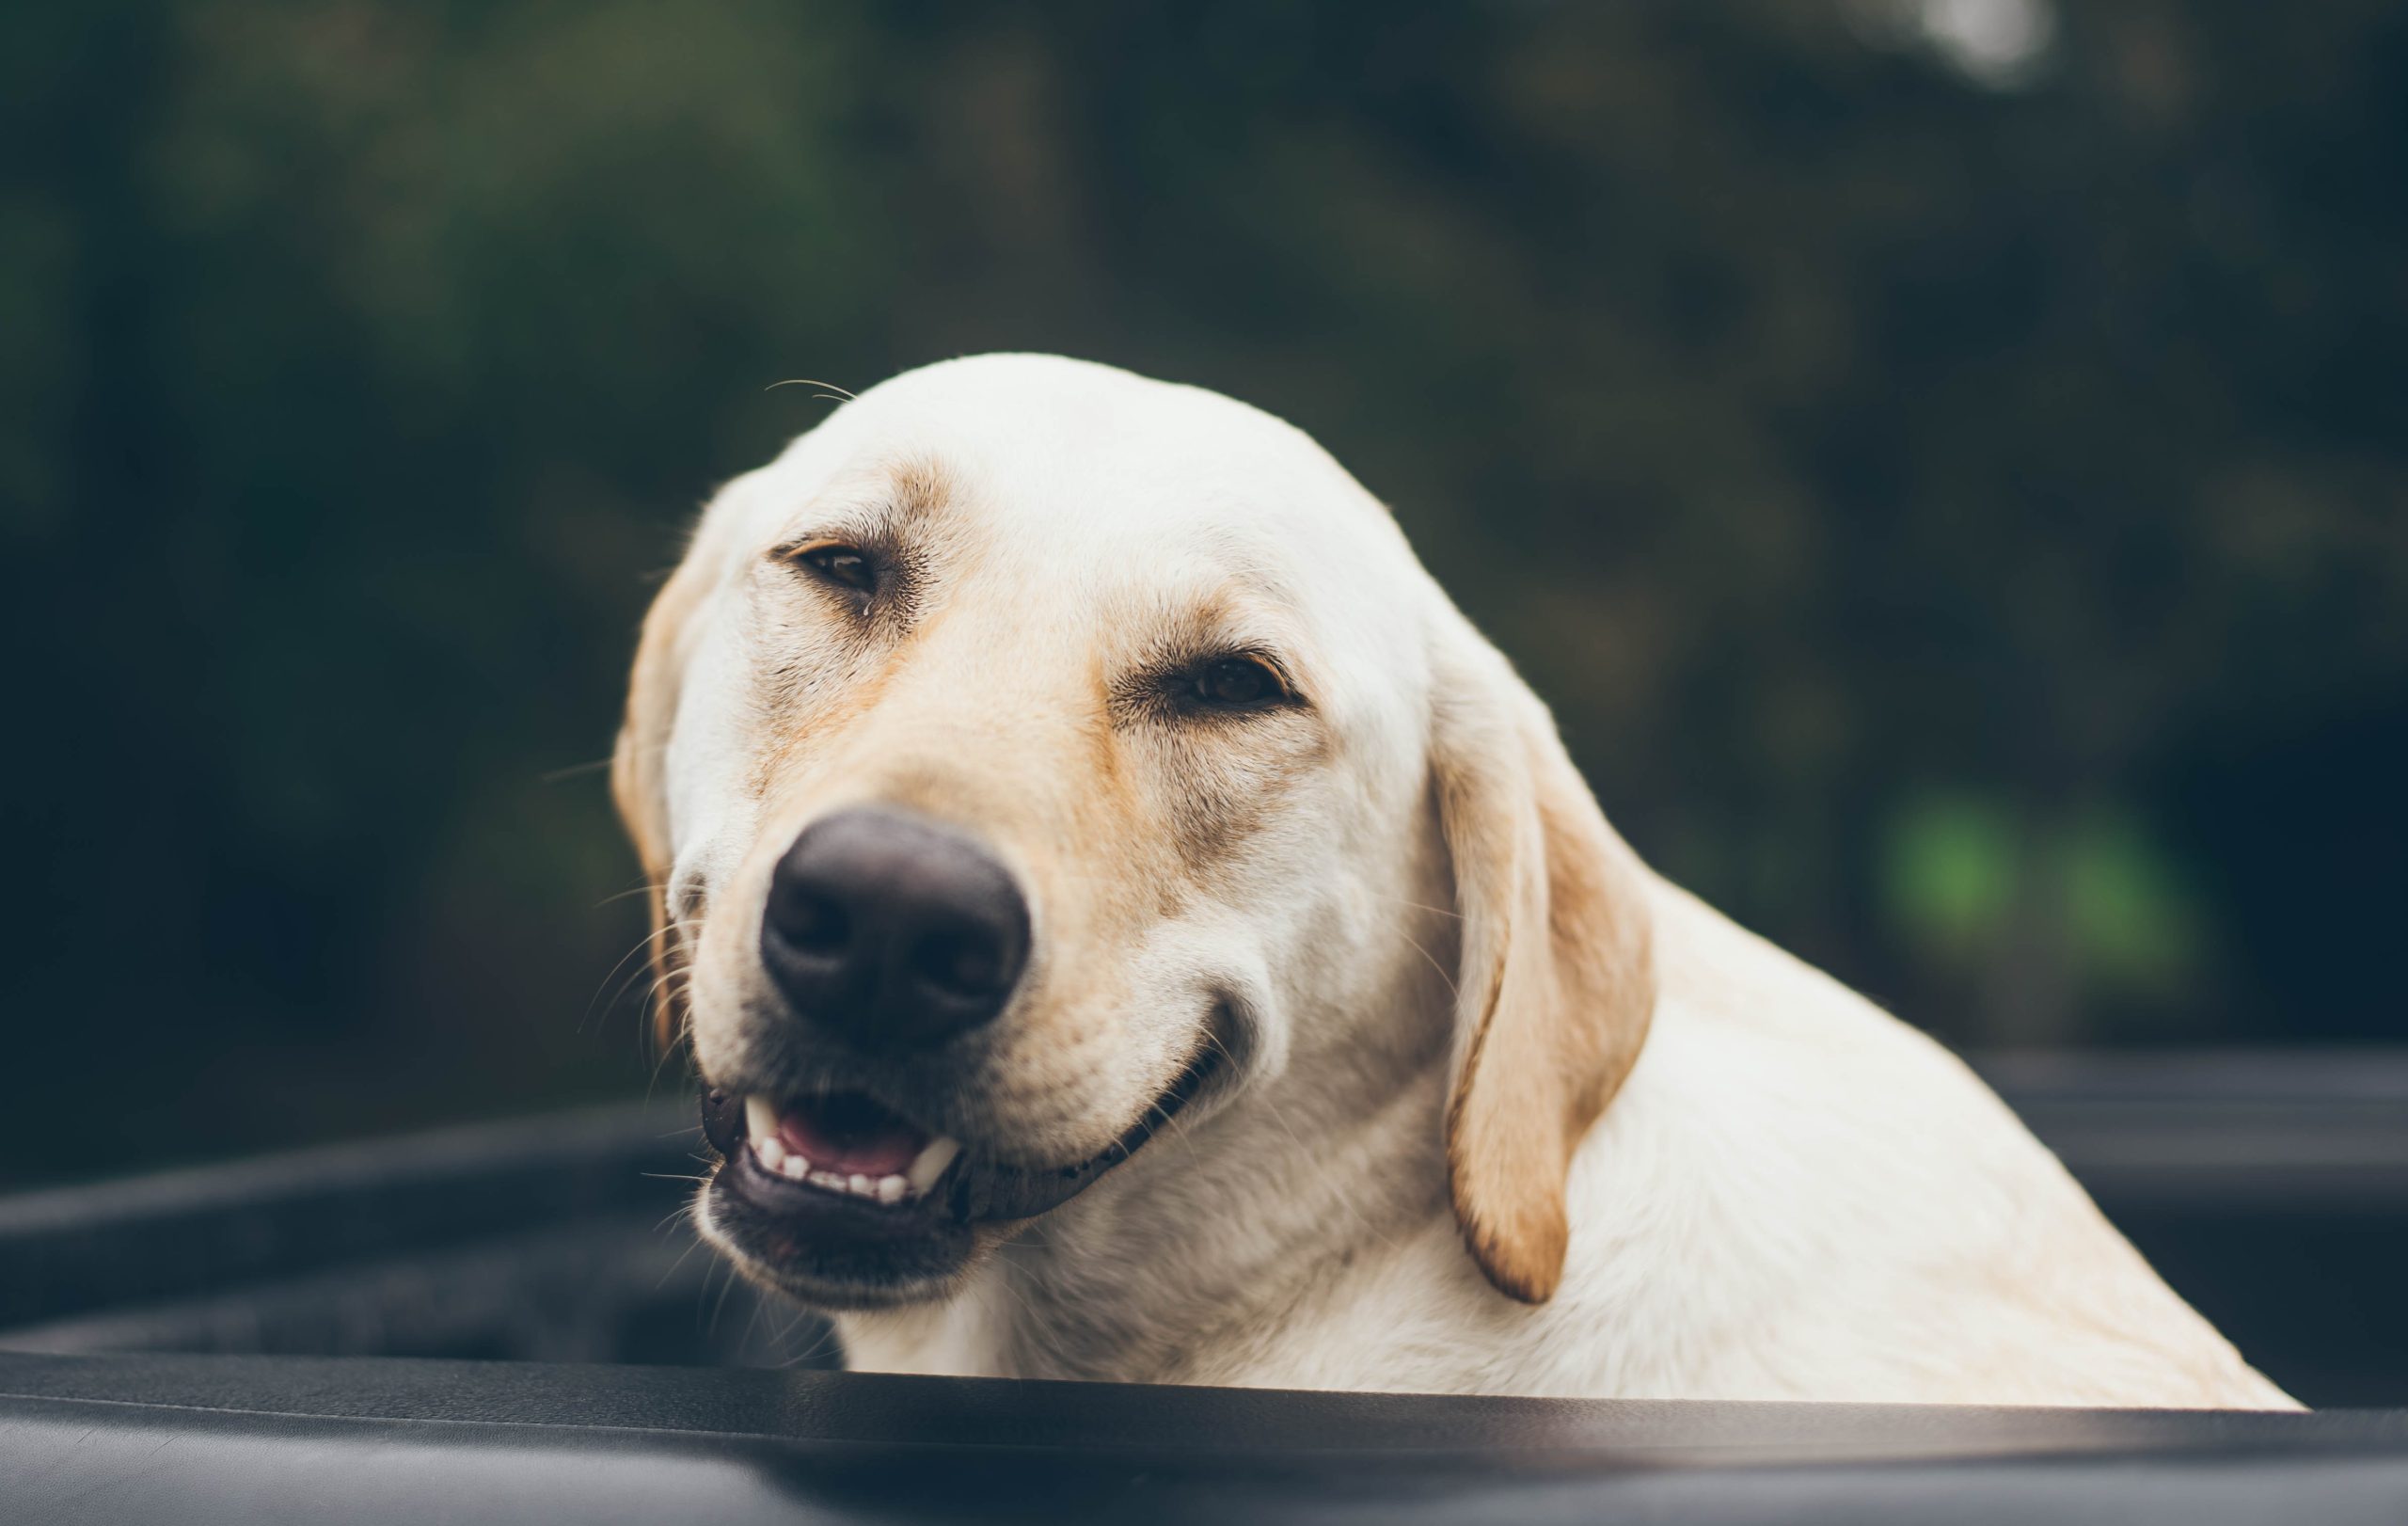 Best Smile Pet Tips You Will Read This Year